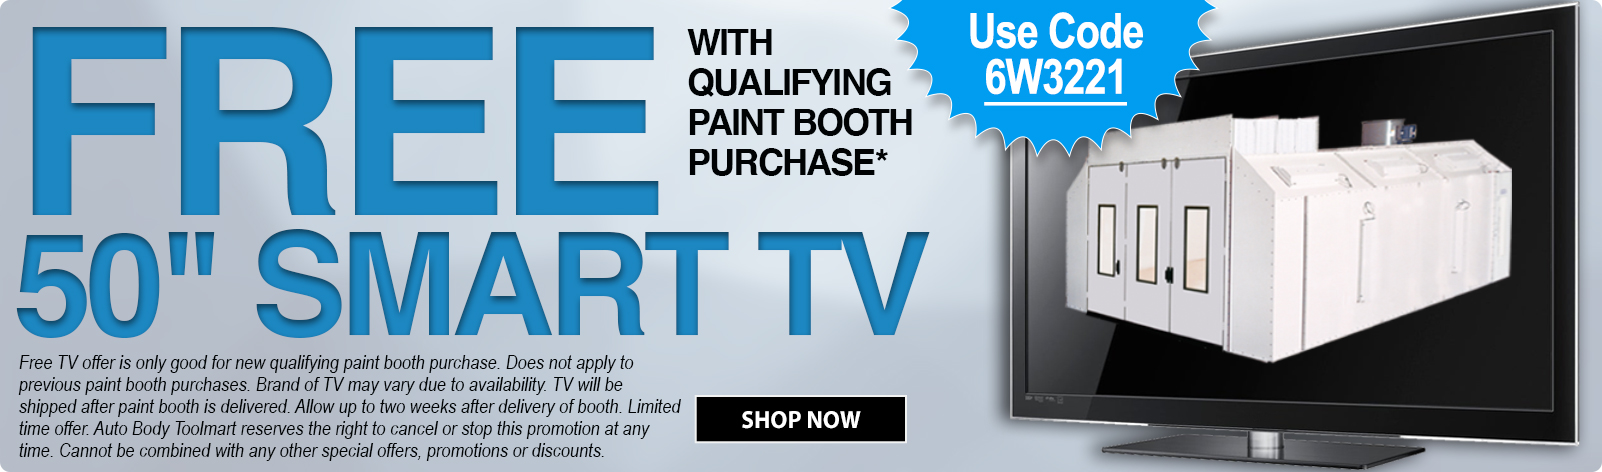 FREE TV with Qualifying Paint Booth Purchase